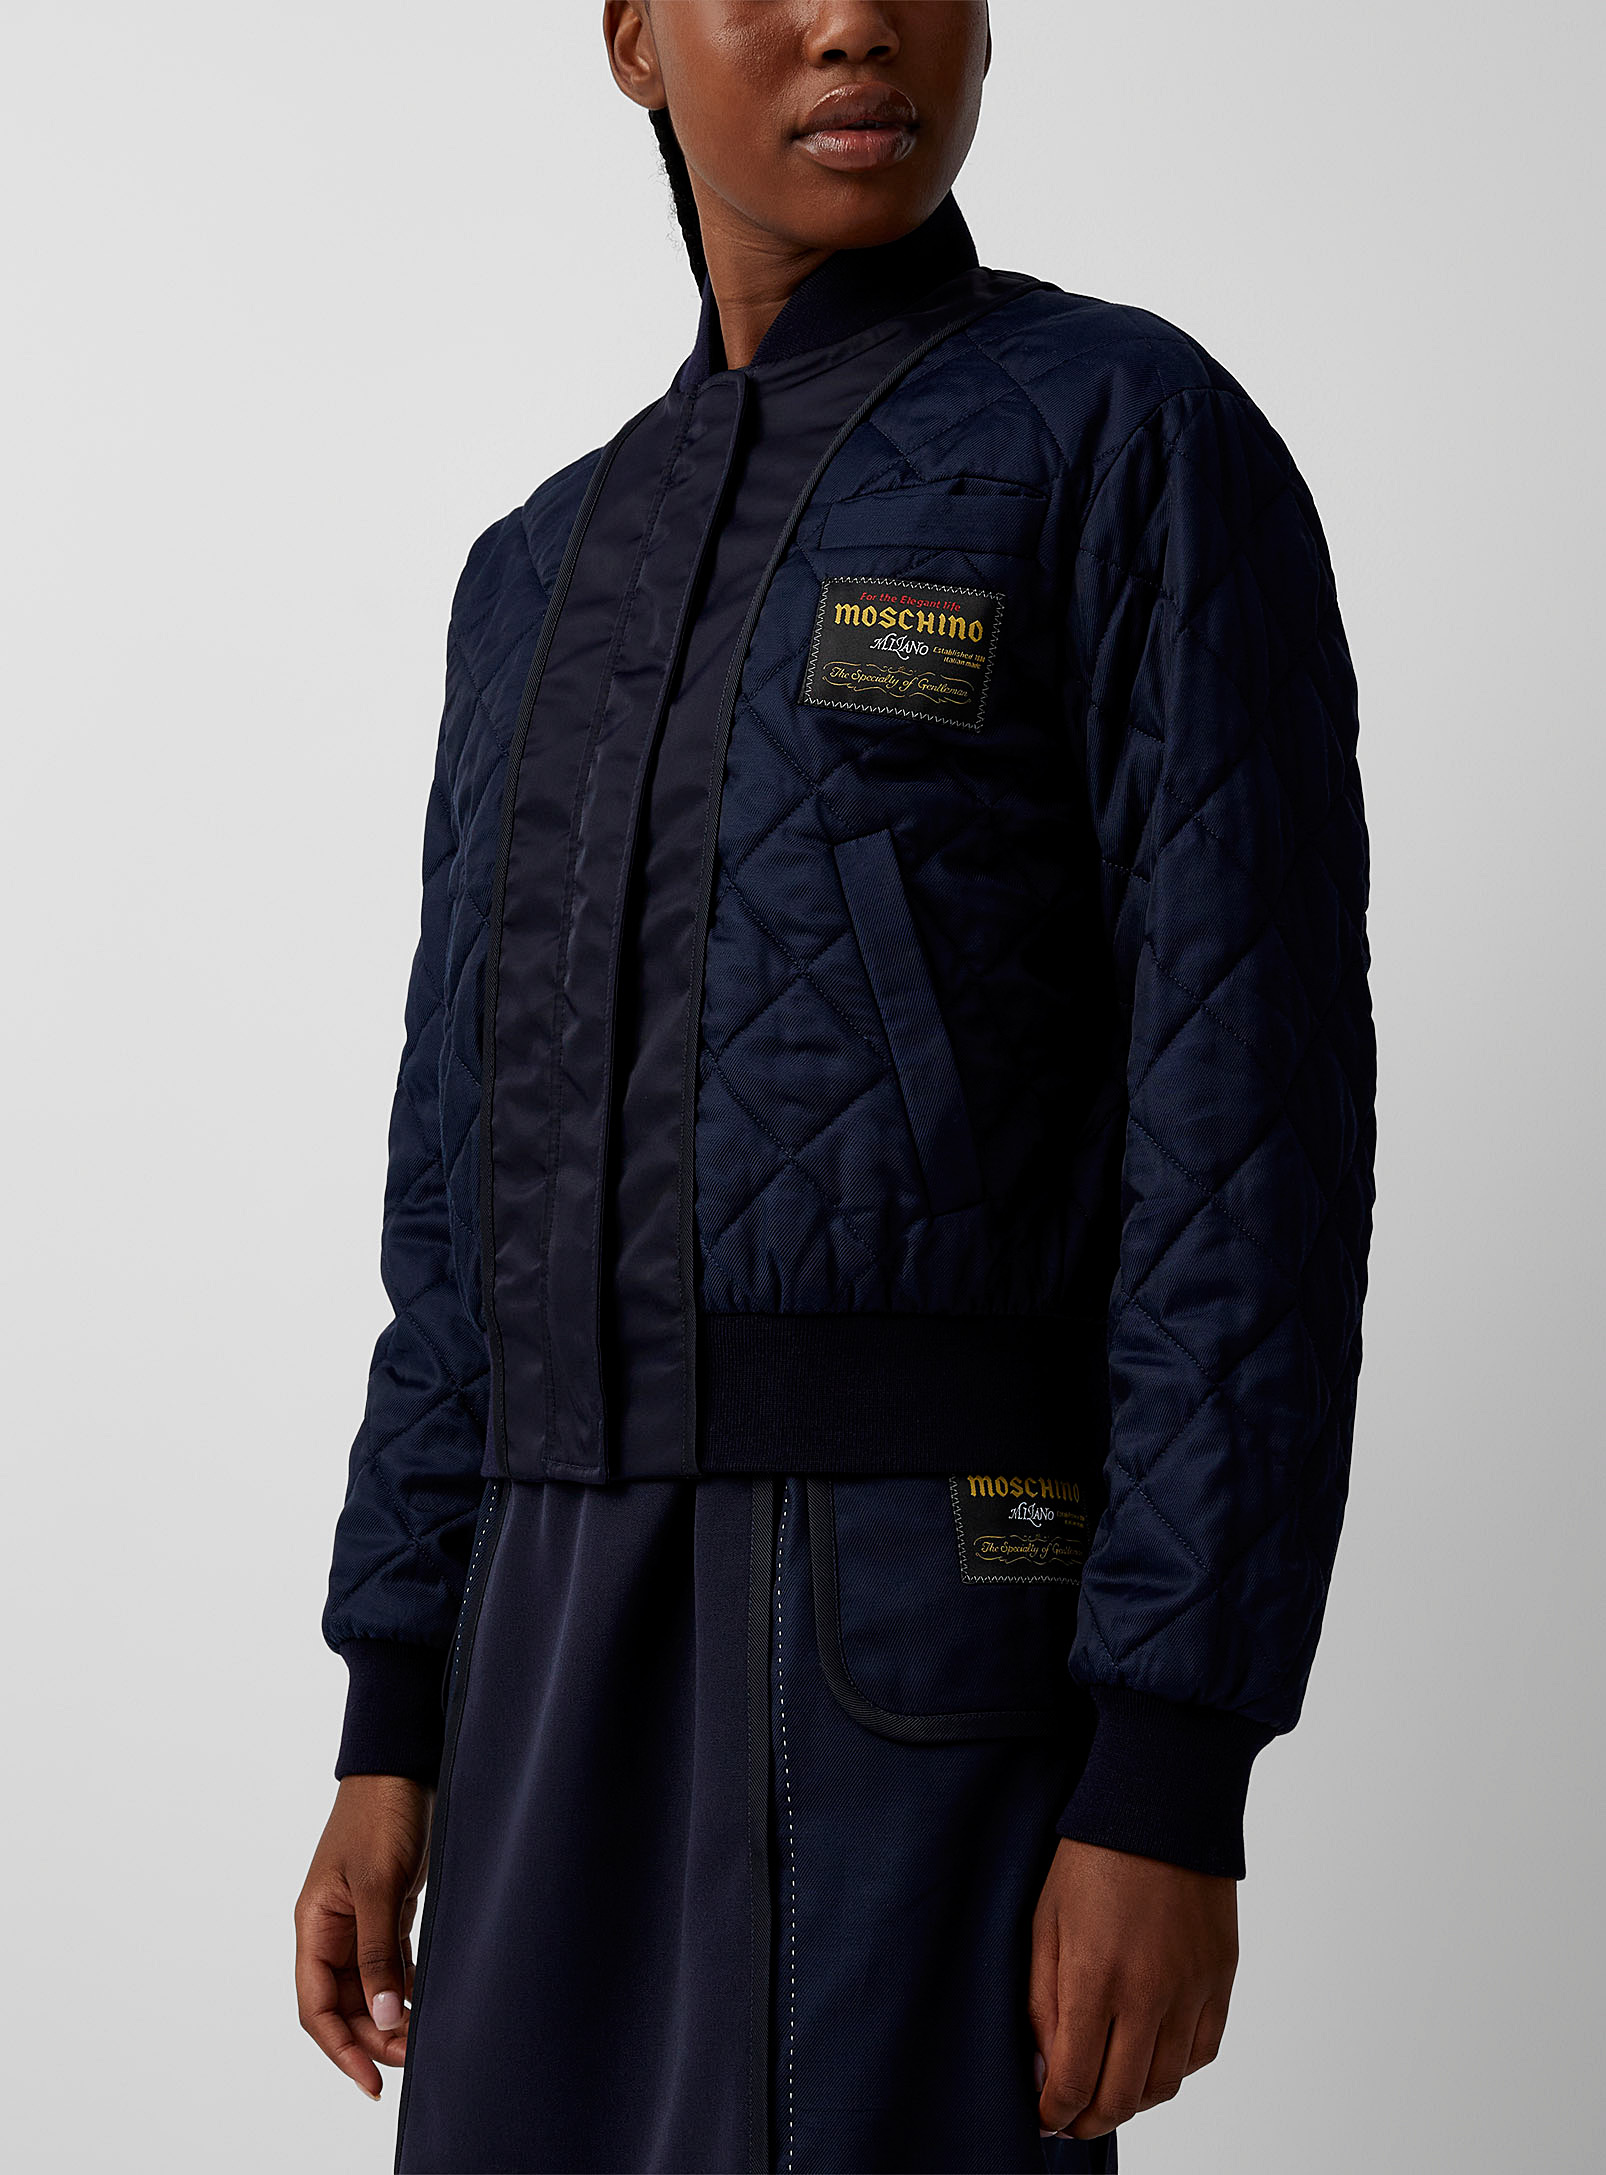 Moschino - Women's Signature label quilted bomber jacket